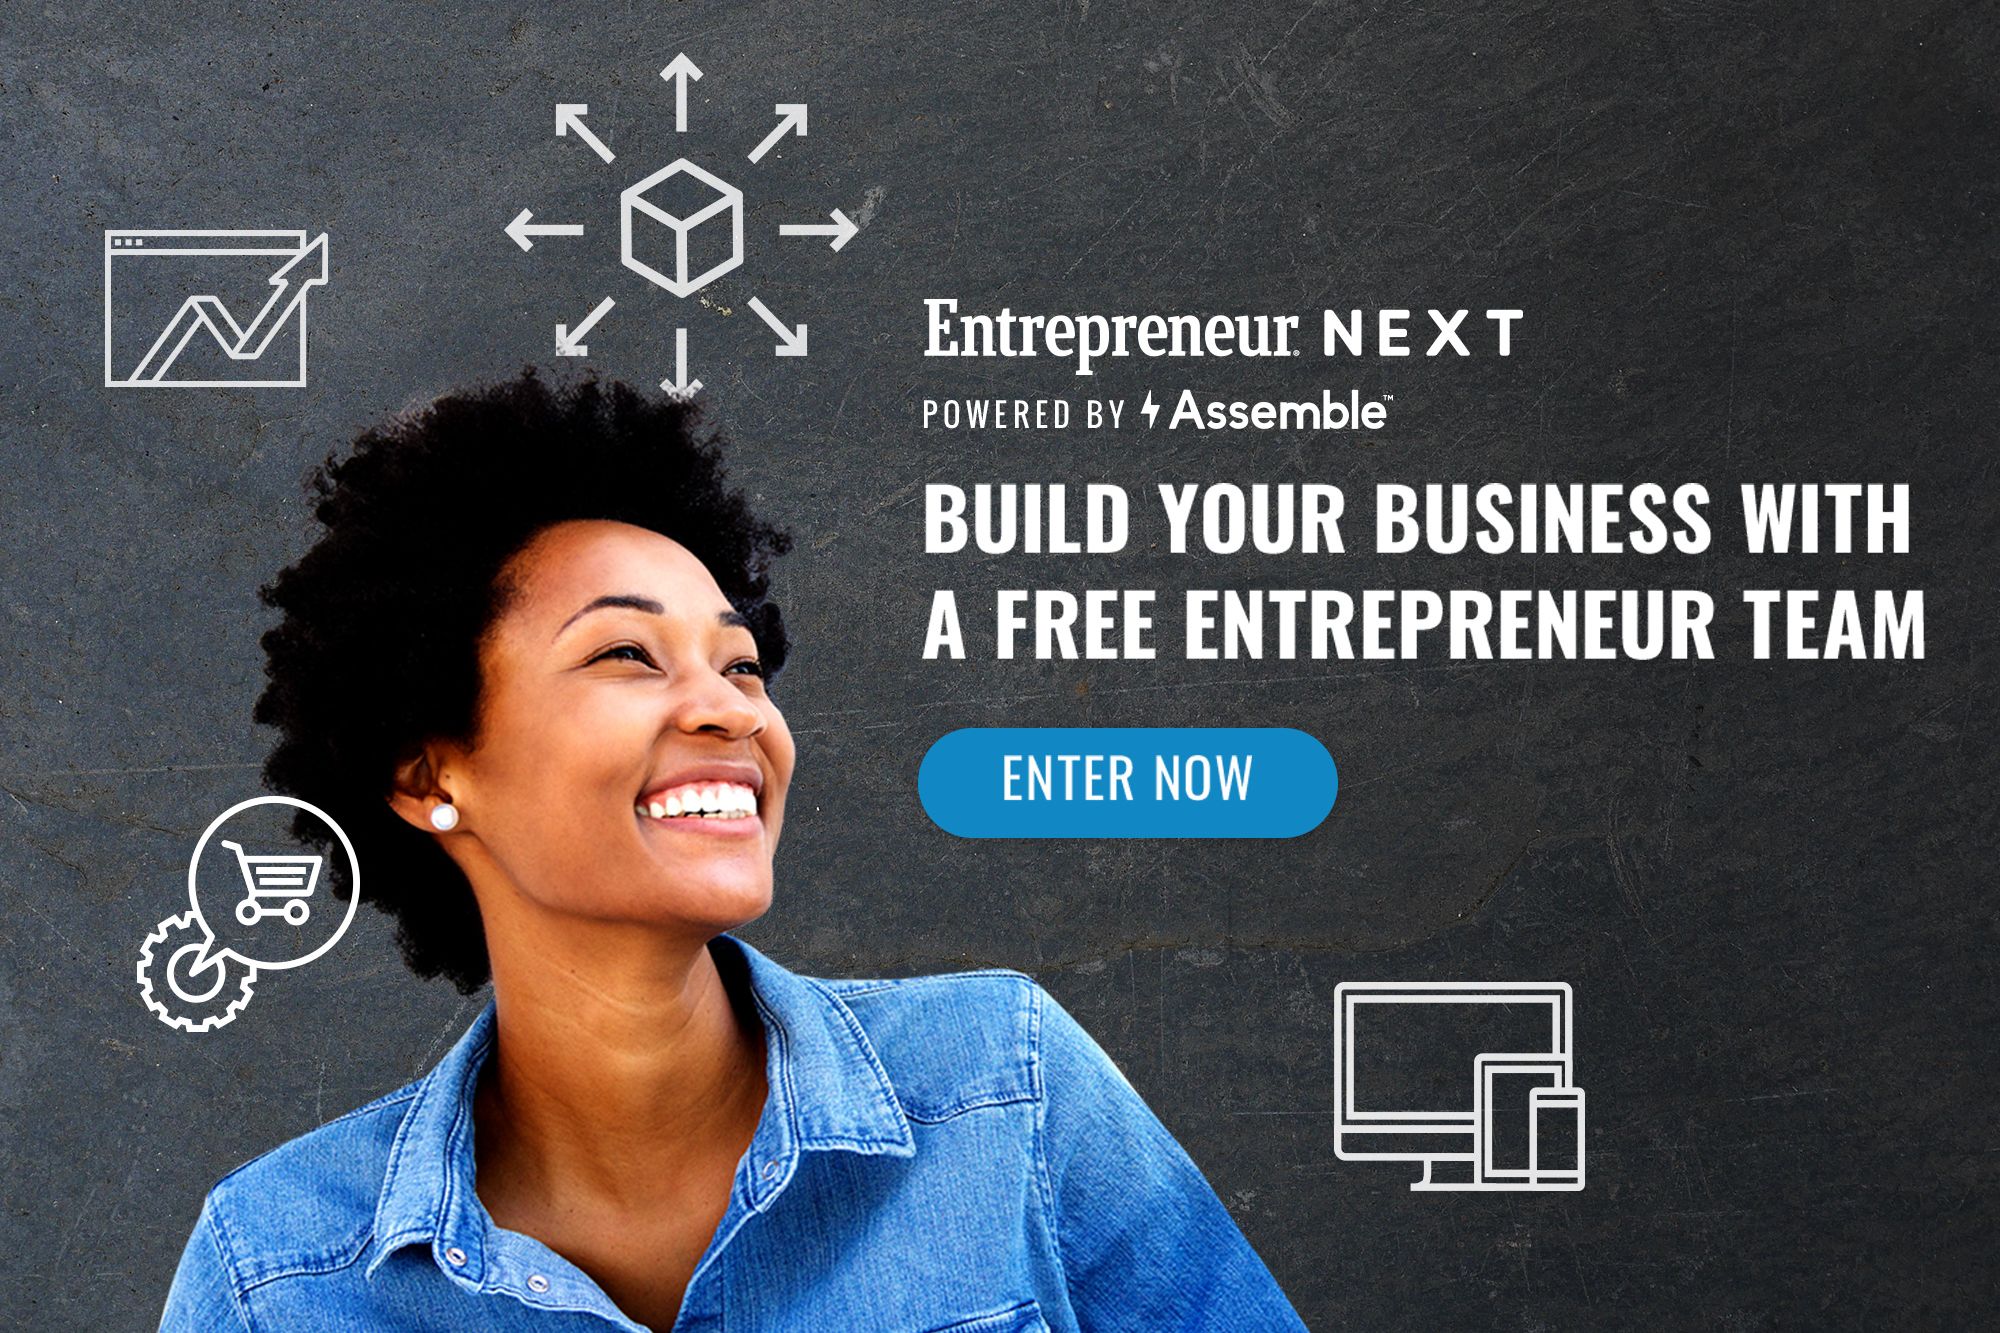 Entrepreneur NEXT Contest: Win a Free Team to Build Your Business